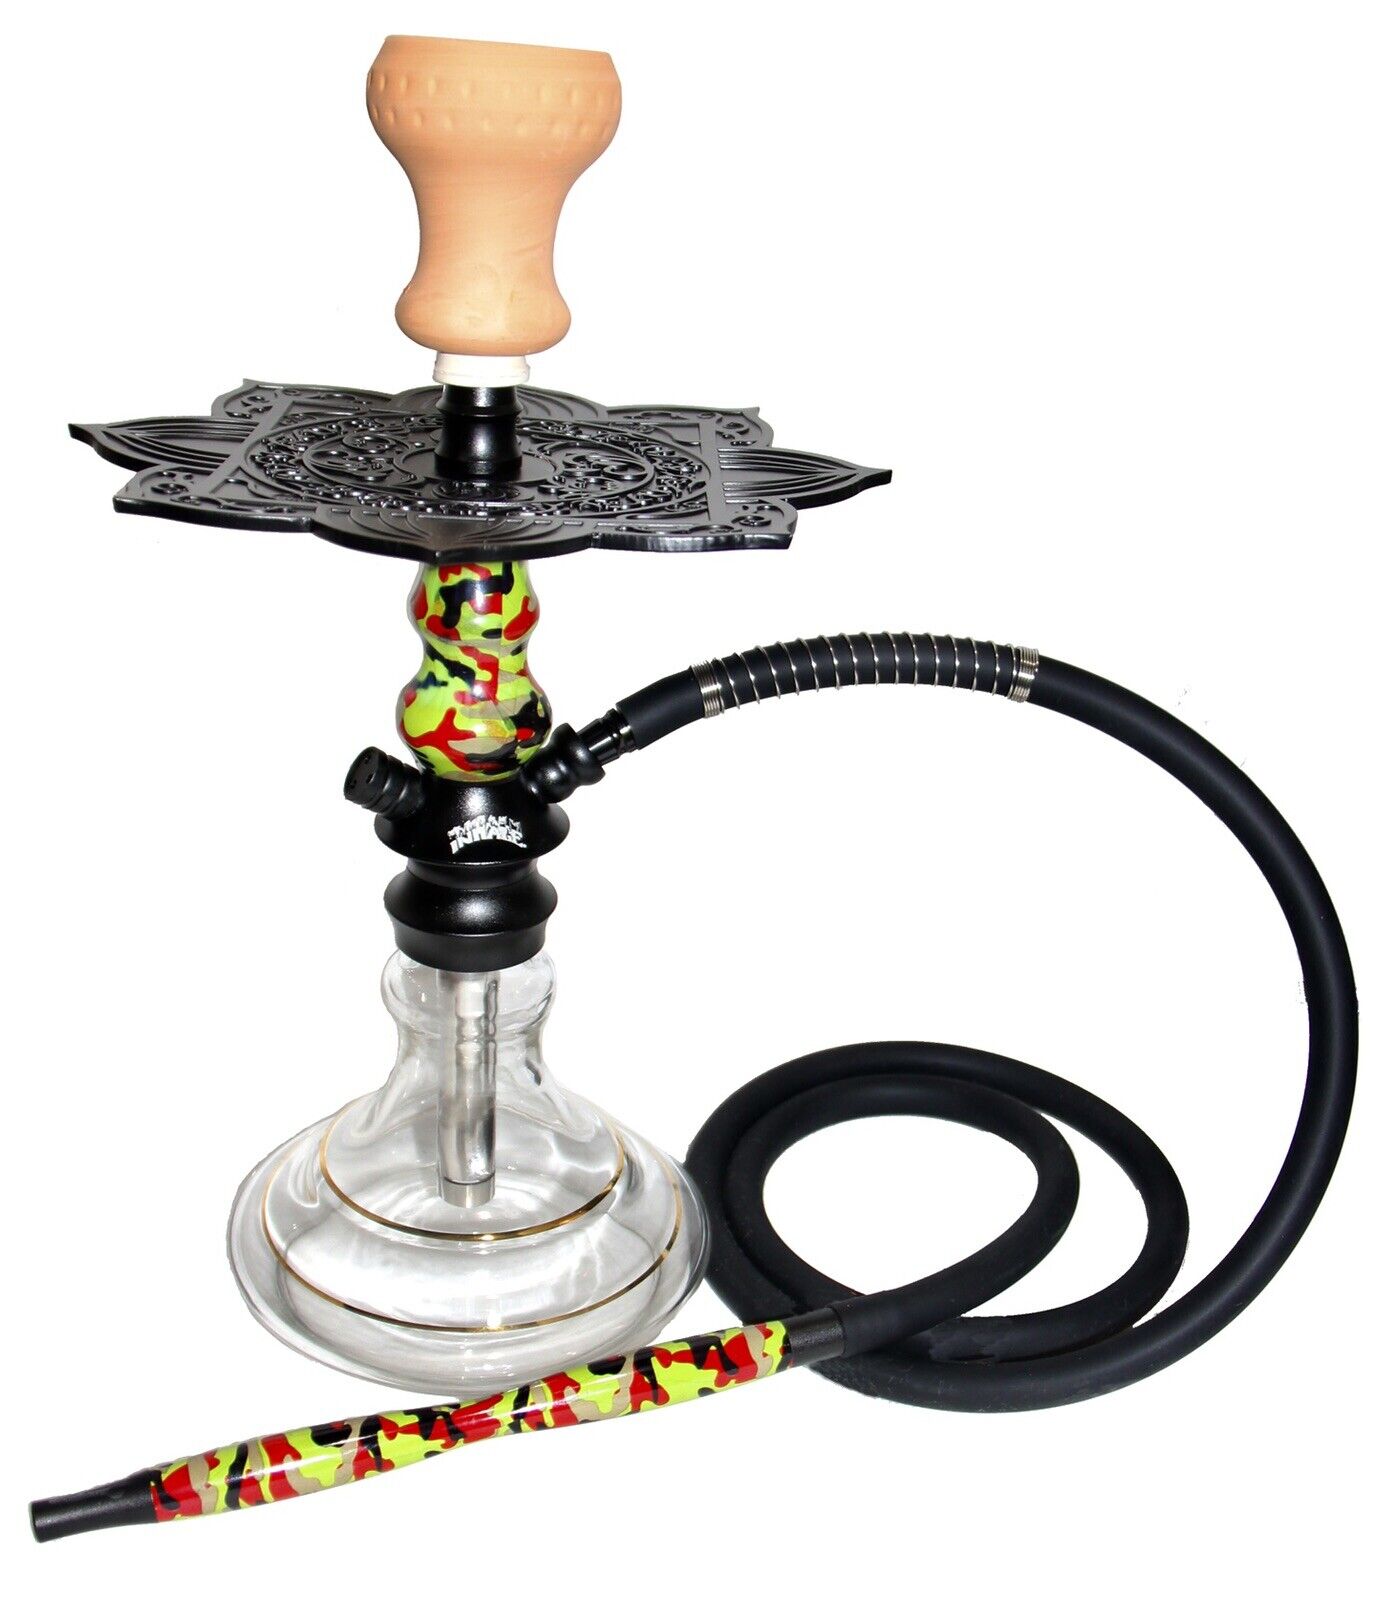 15’’ Inhale®️Hookah With Interlock System,A  hand Blown Glass & A Silicone Hose